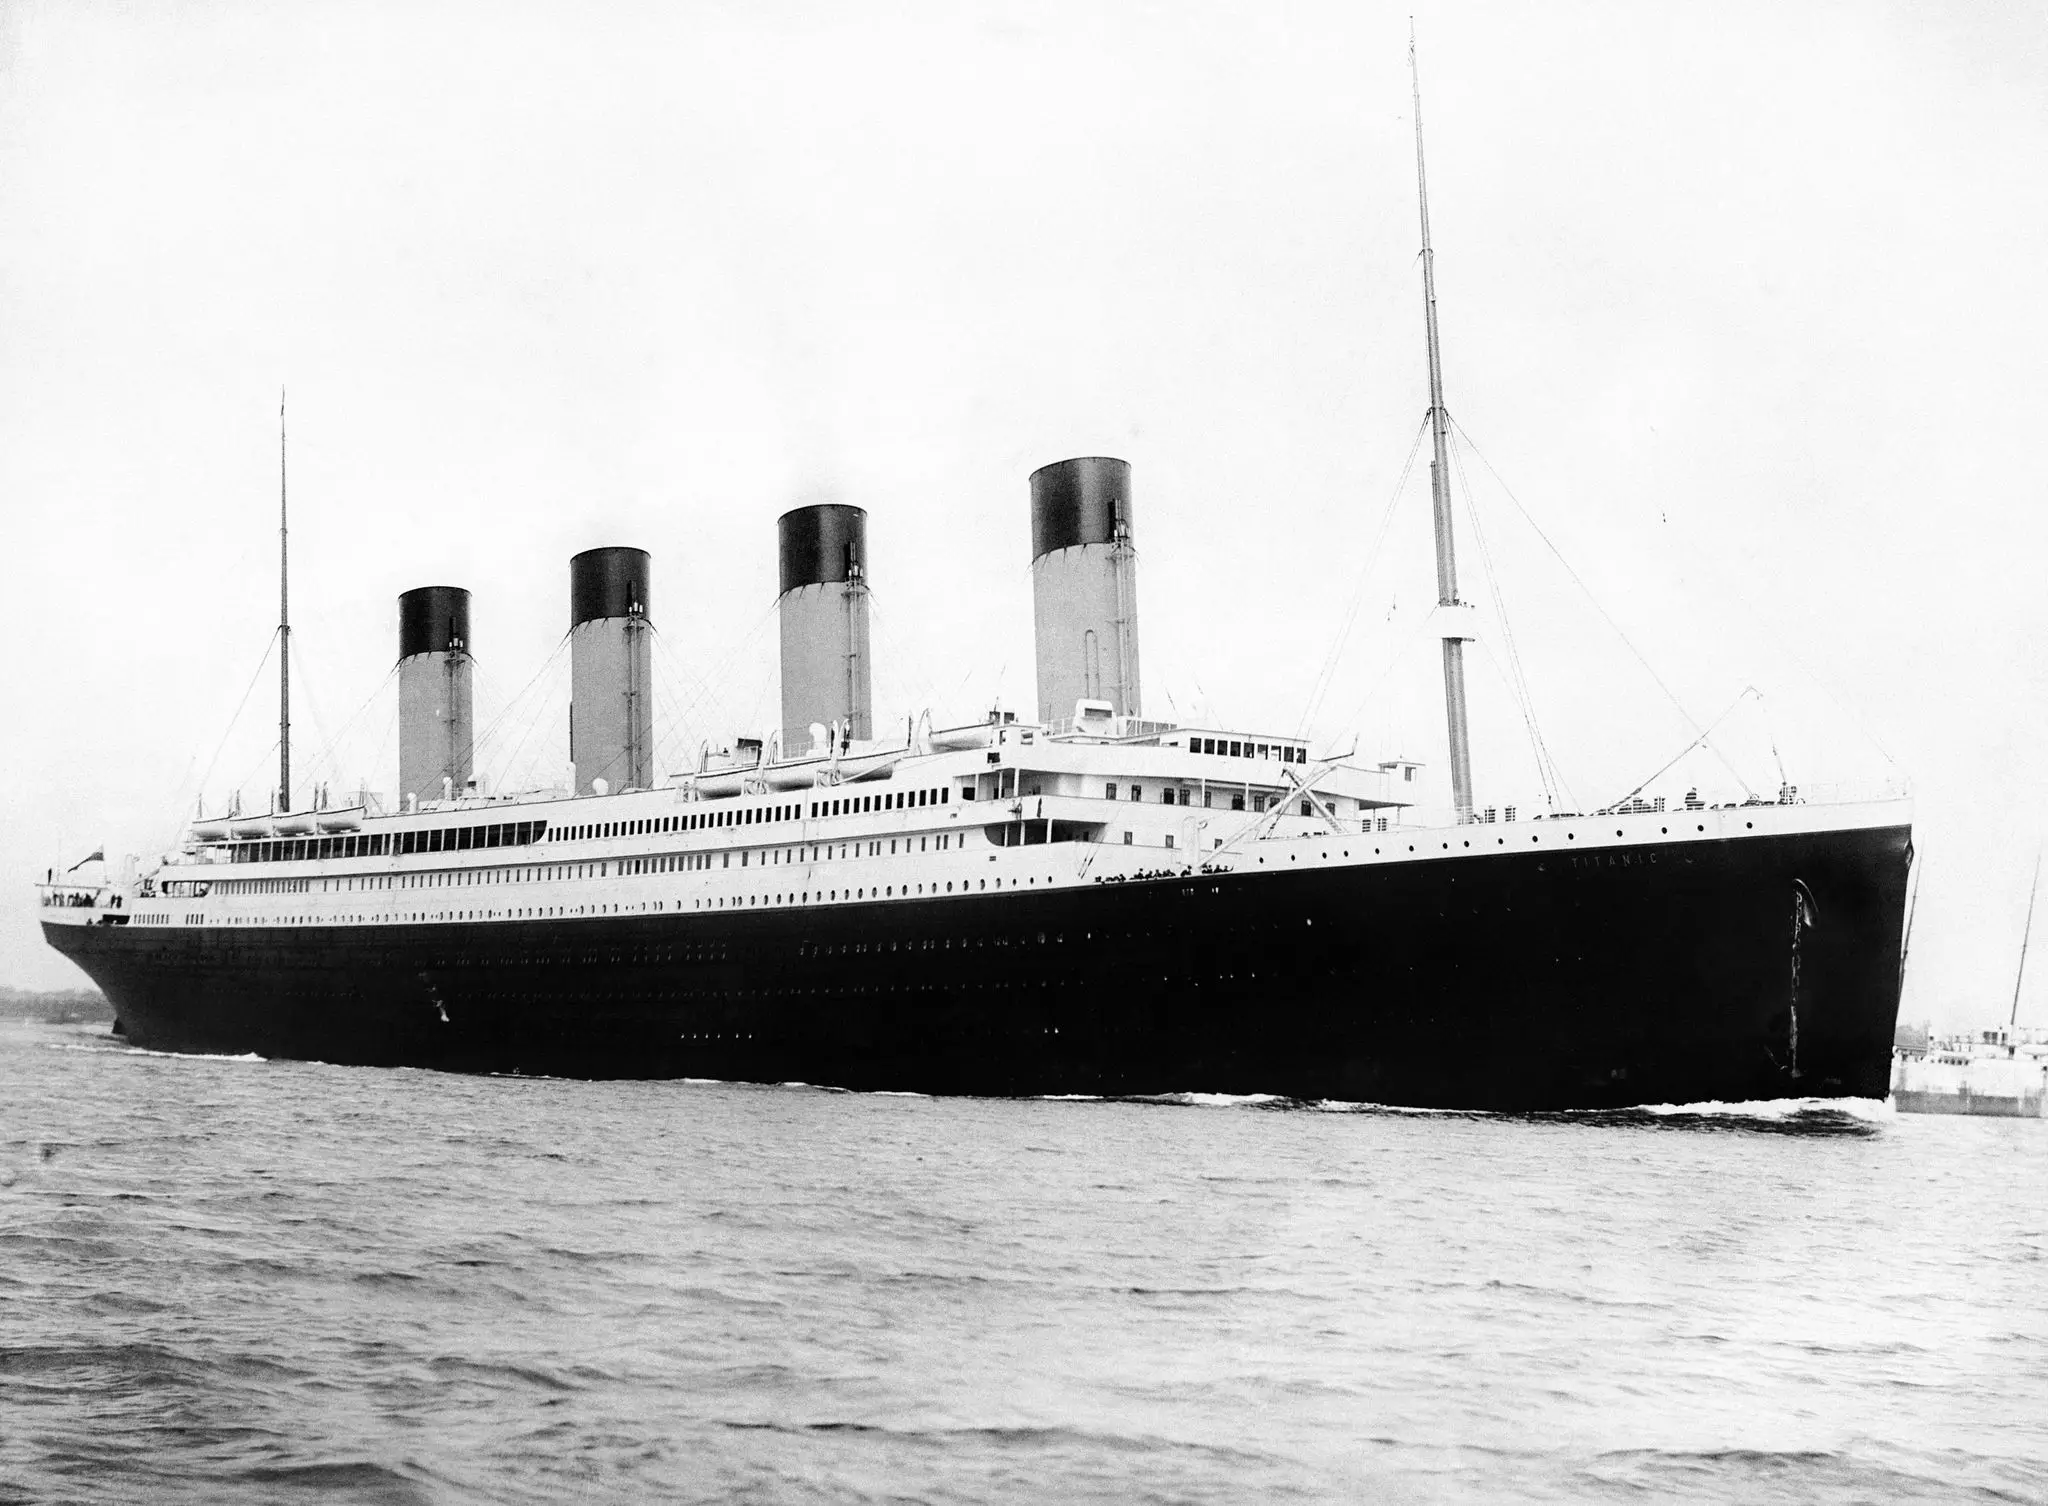 Private Dives Into The Titanic Wreckage Will Open in 2021